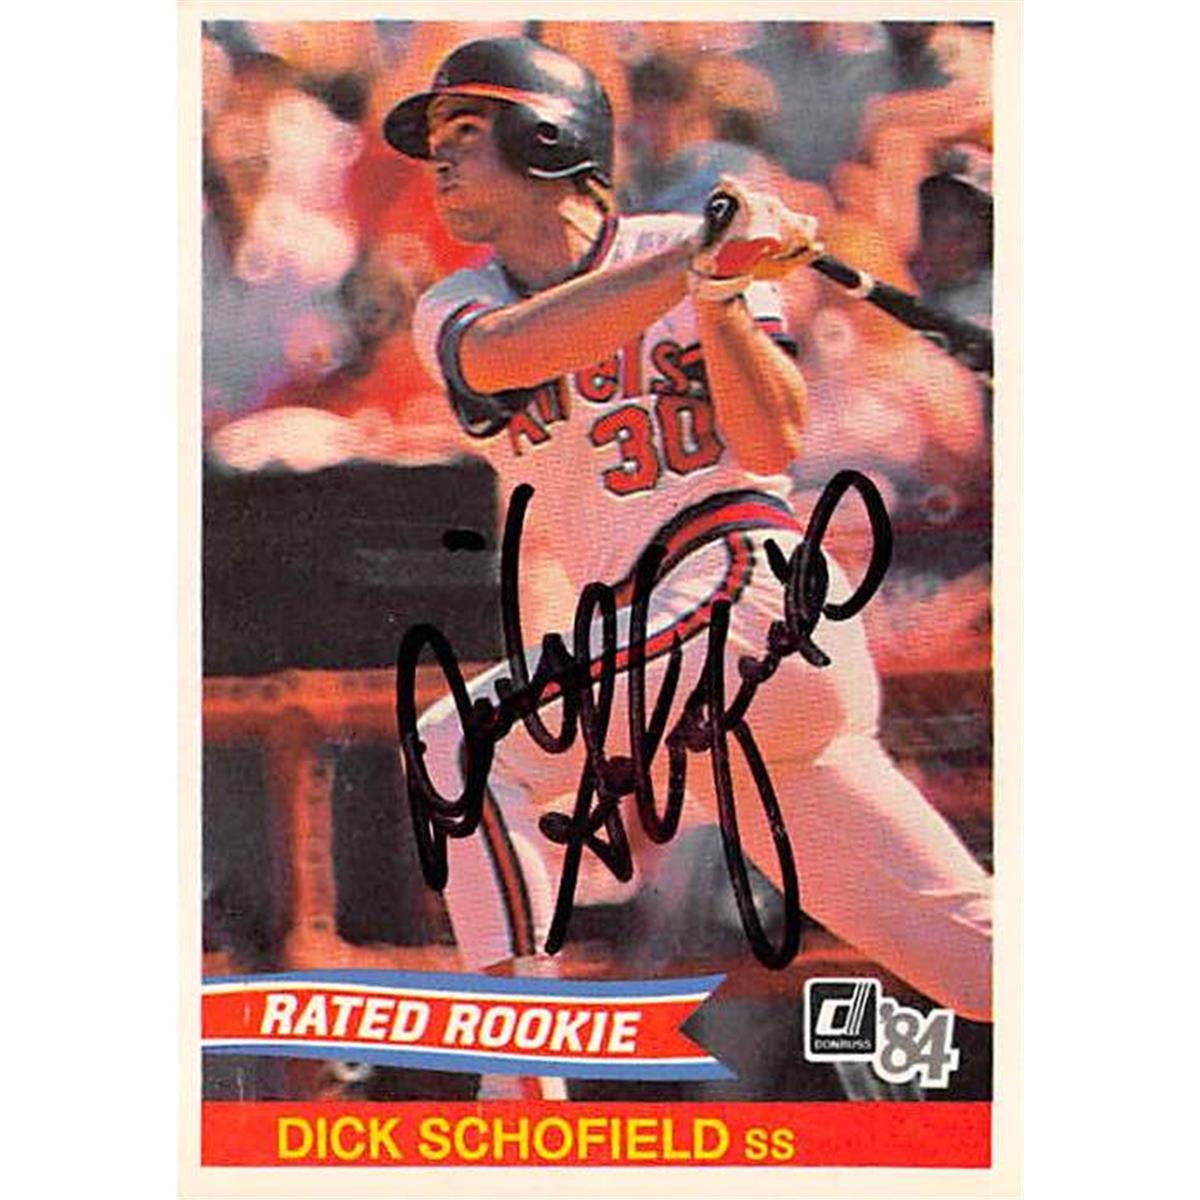 Picture of Autograph Warehouse 366295 Dick Schofield Autographed Baseball Card - California Angels 1984 Donruss No.35 Rate Rookie